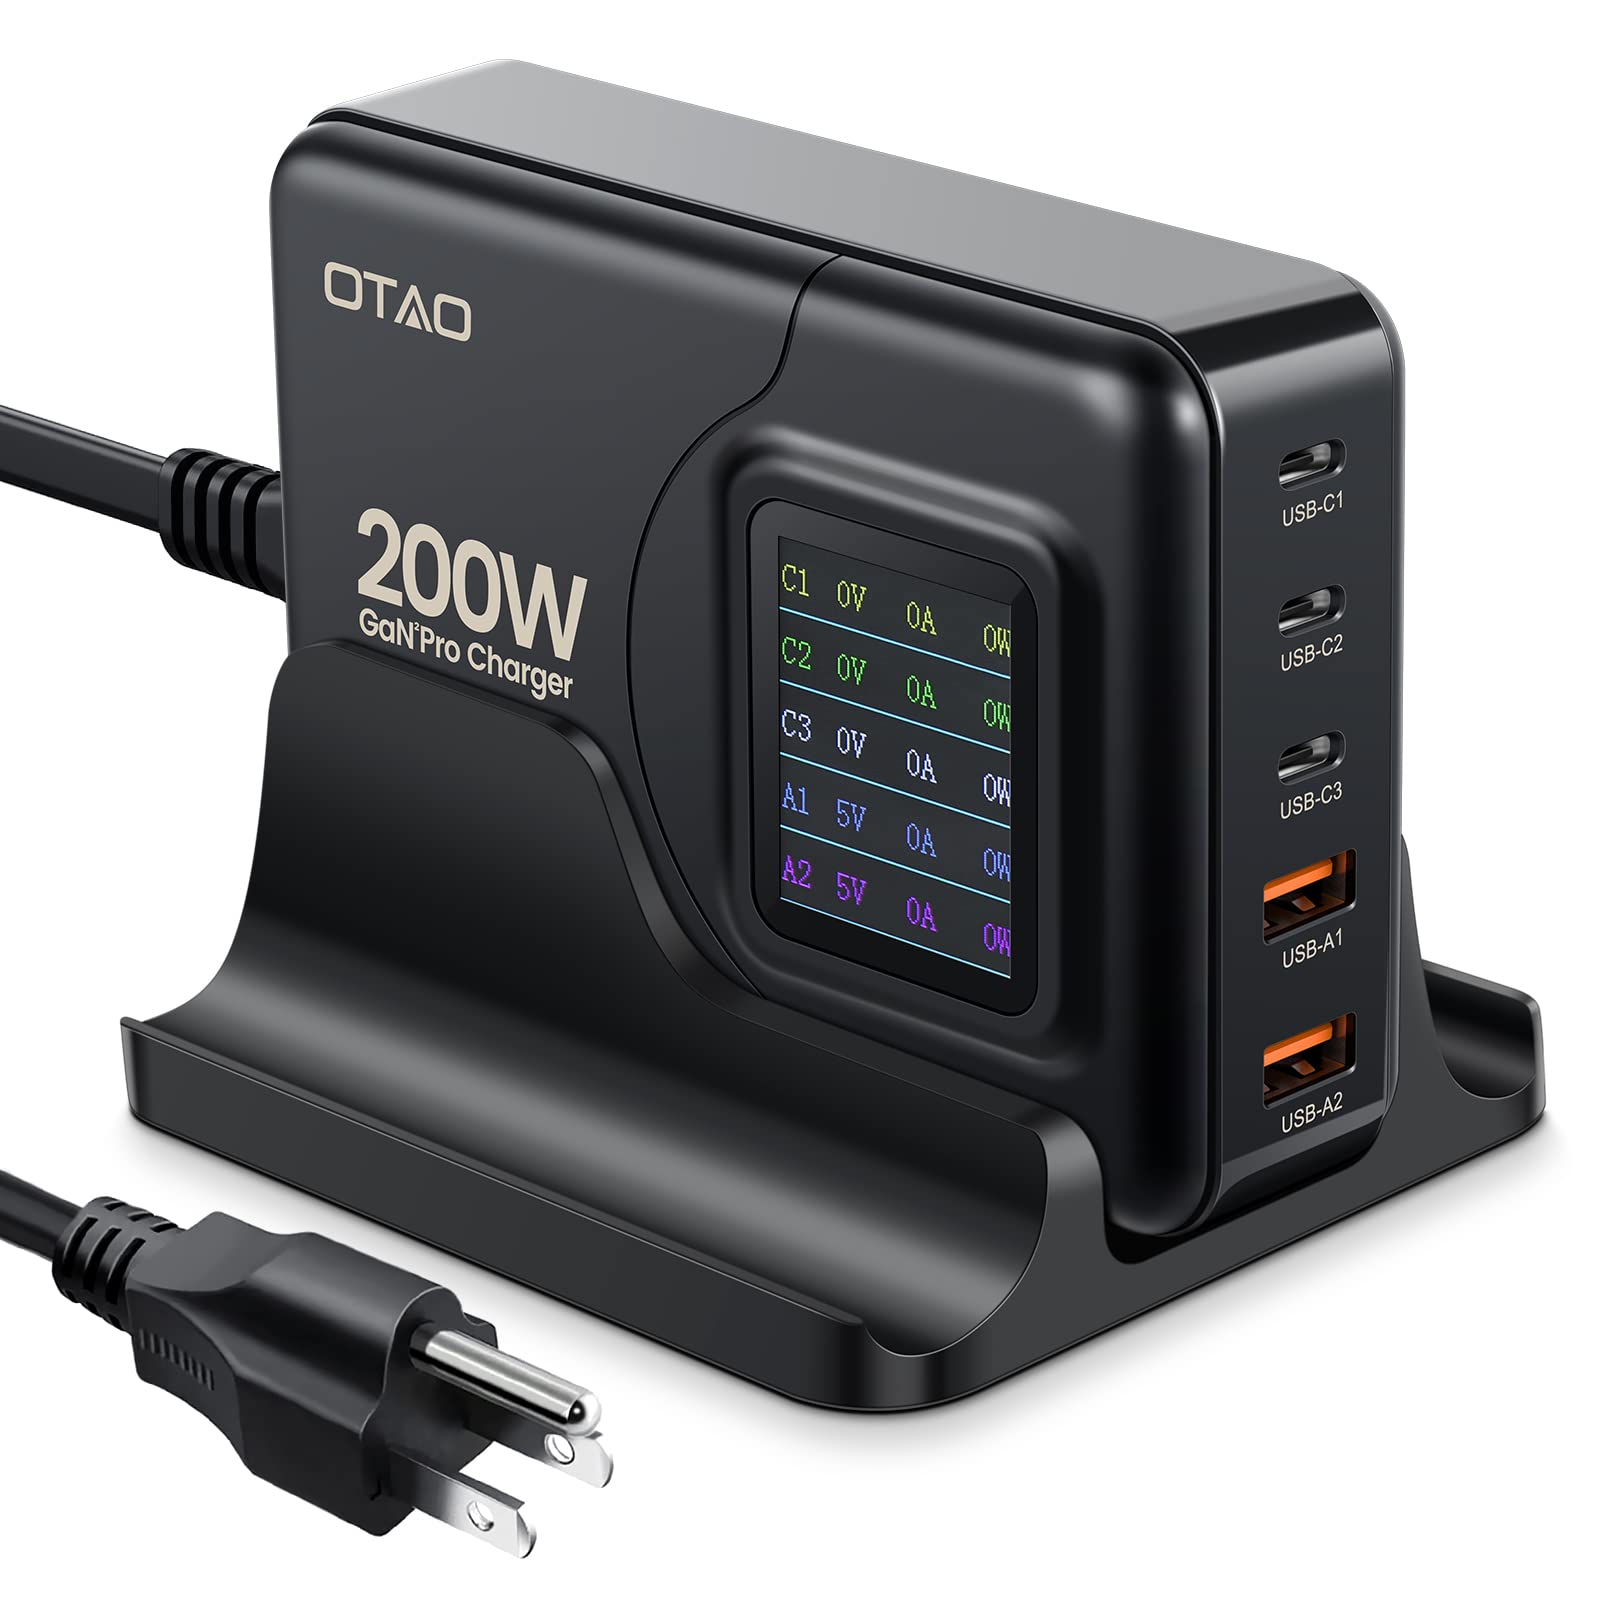 200W USB C Charger OTAO Desktop 5-Port GaN Charger with LCD Display PD 3.0 100WQC 3.0 22.5WPPS 45W Fast Charging Station